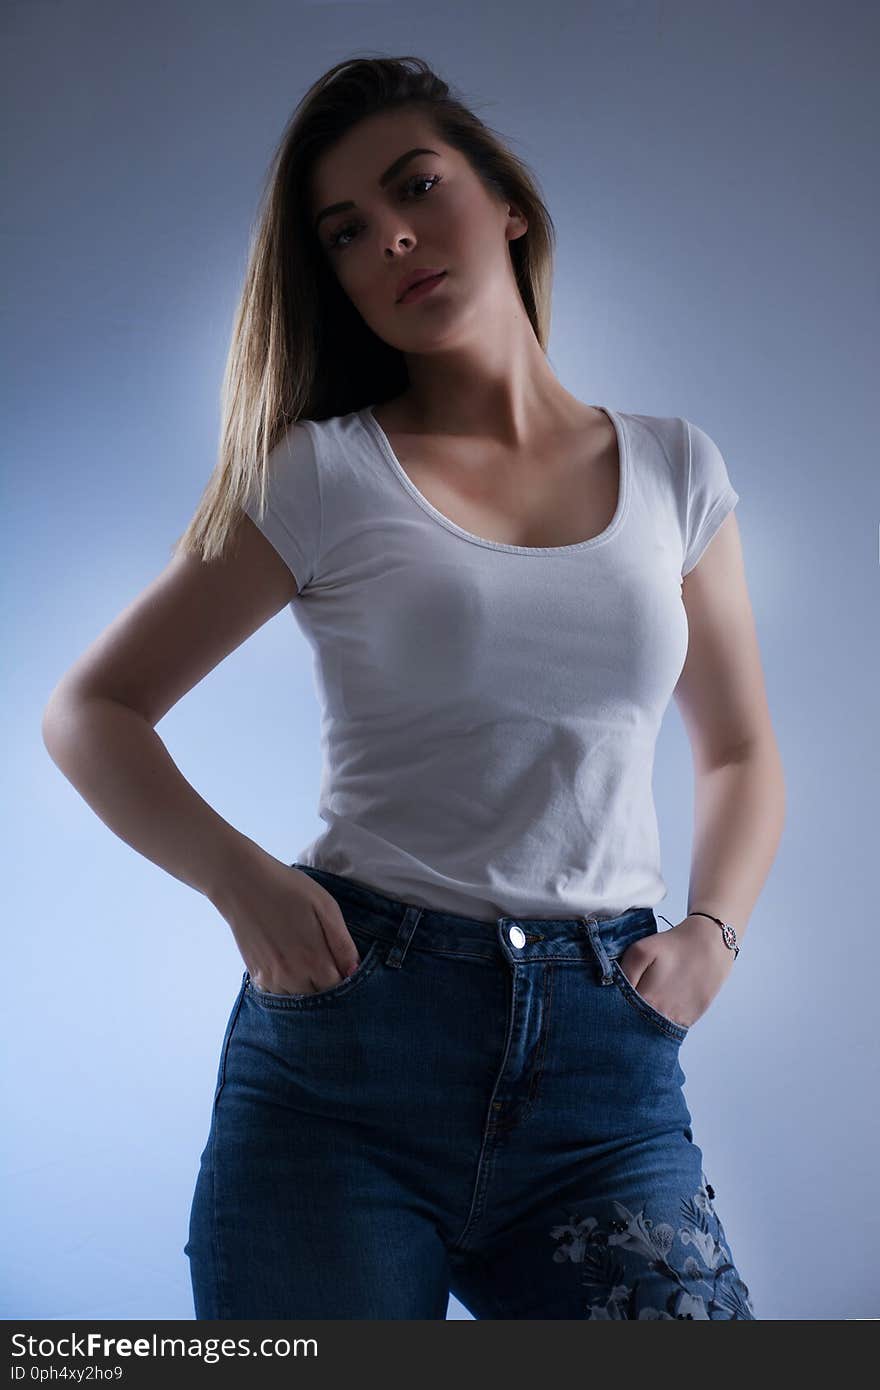 Low key girl portrait with blonde hair in white t shirt and blue jeans, looking on camera and hands in pockets. Female portrait in studio Close up. Low key girl portrait with blonde hair in white t shirt and blue jeans, looking on camera and hands in pockets. Female portrait in studio Close up